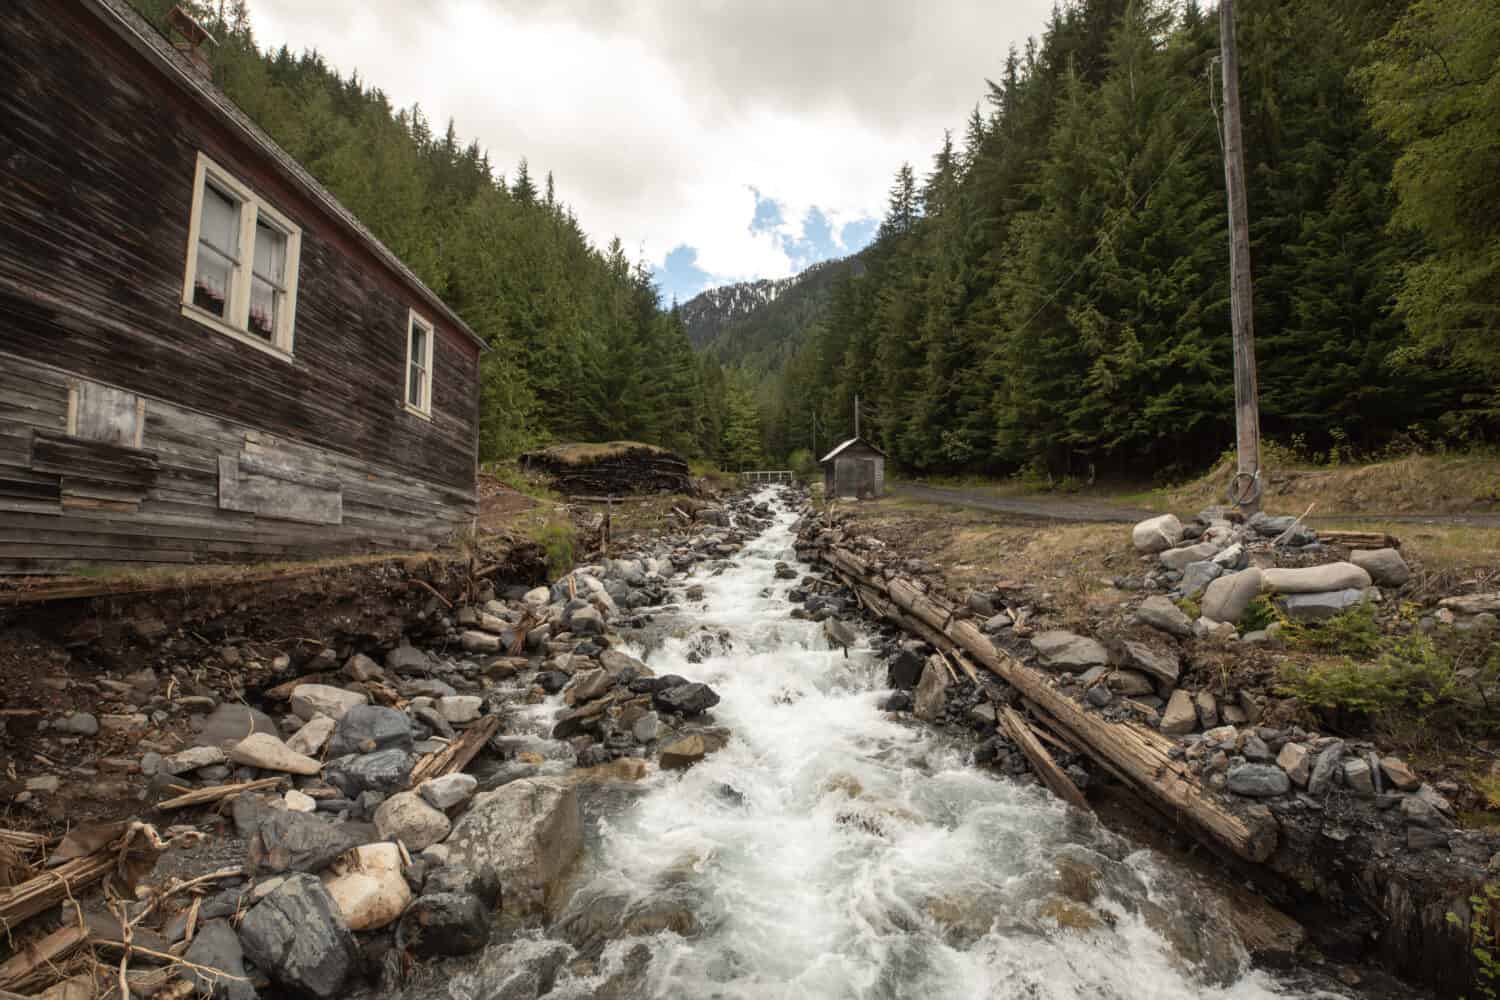 River leading up to the mountains in an old abandoned silver mining town. Sandon, bc canada